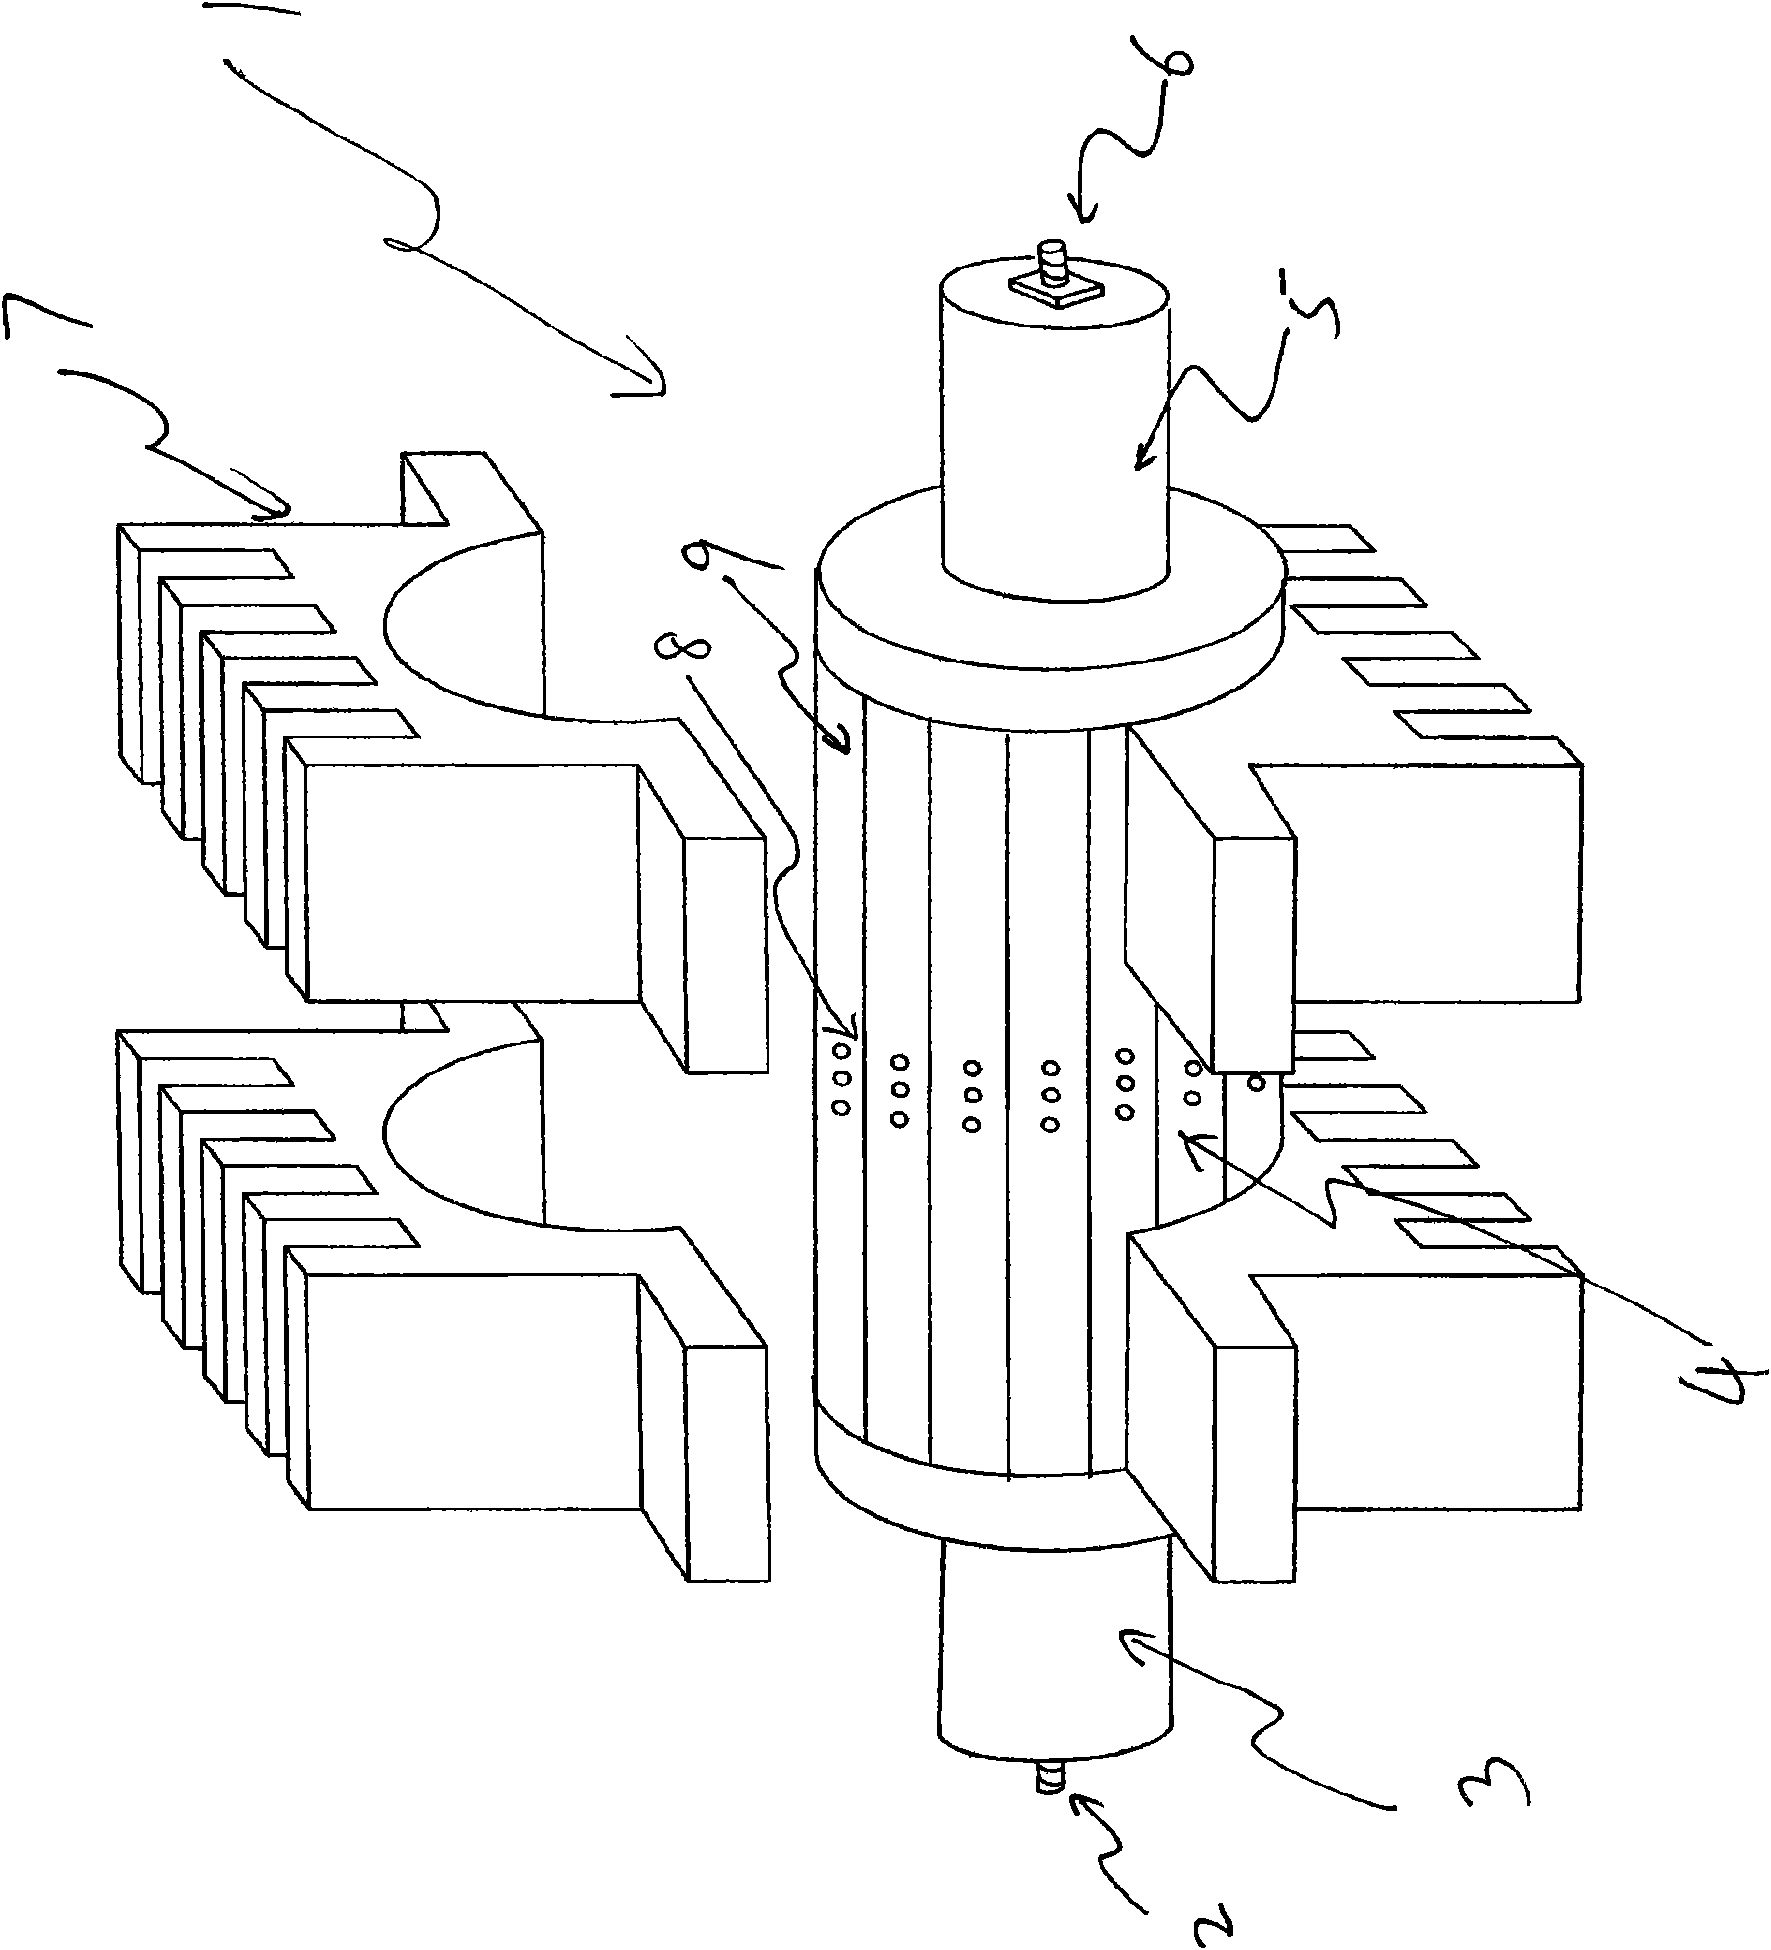 Integrated cooling system of high-power amplifier using waveguide space synthesis method